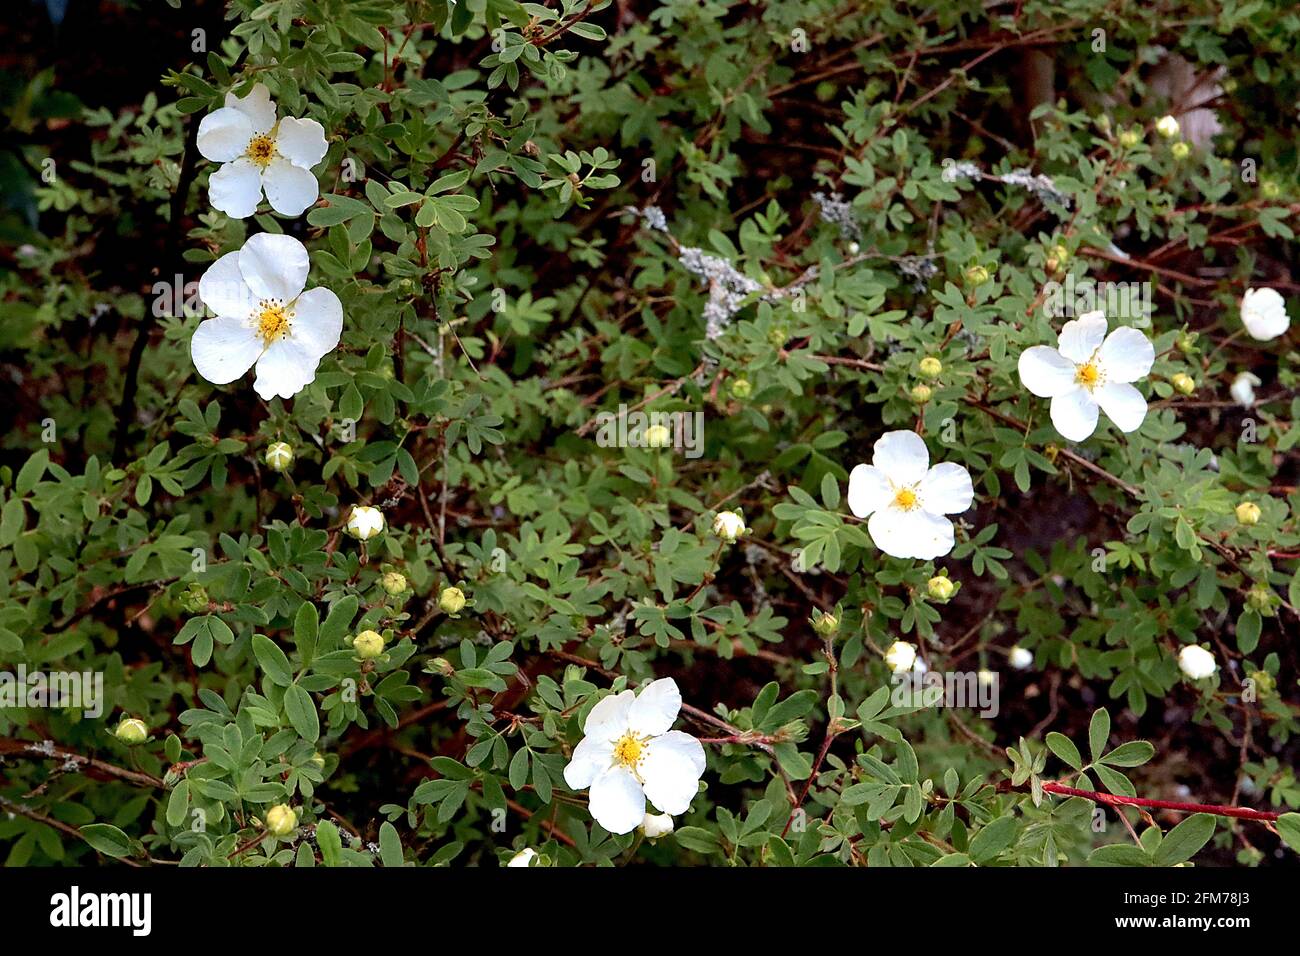 Cistus x obtusifolius ‘Thrive’ rock rose Thrive – white flowers and small dark green leaves,  May, England, UK Stock Photo